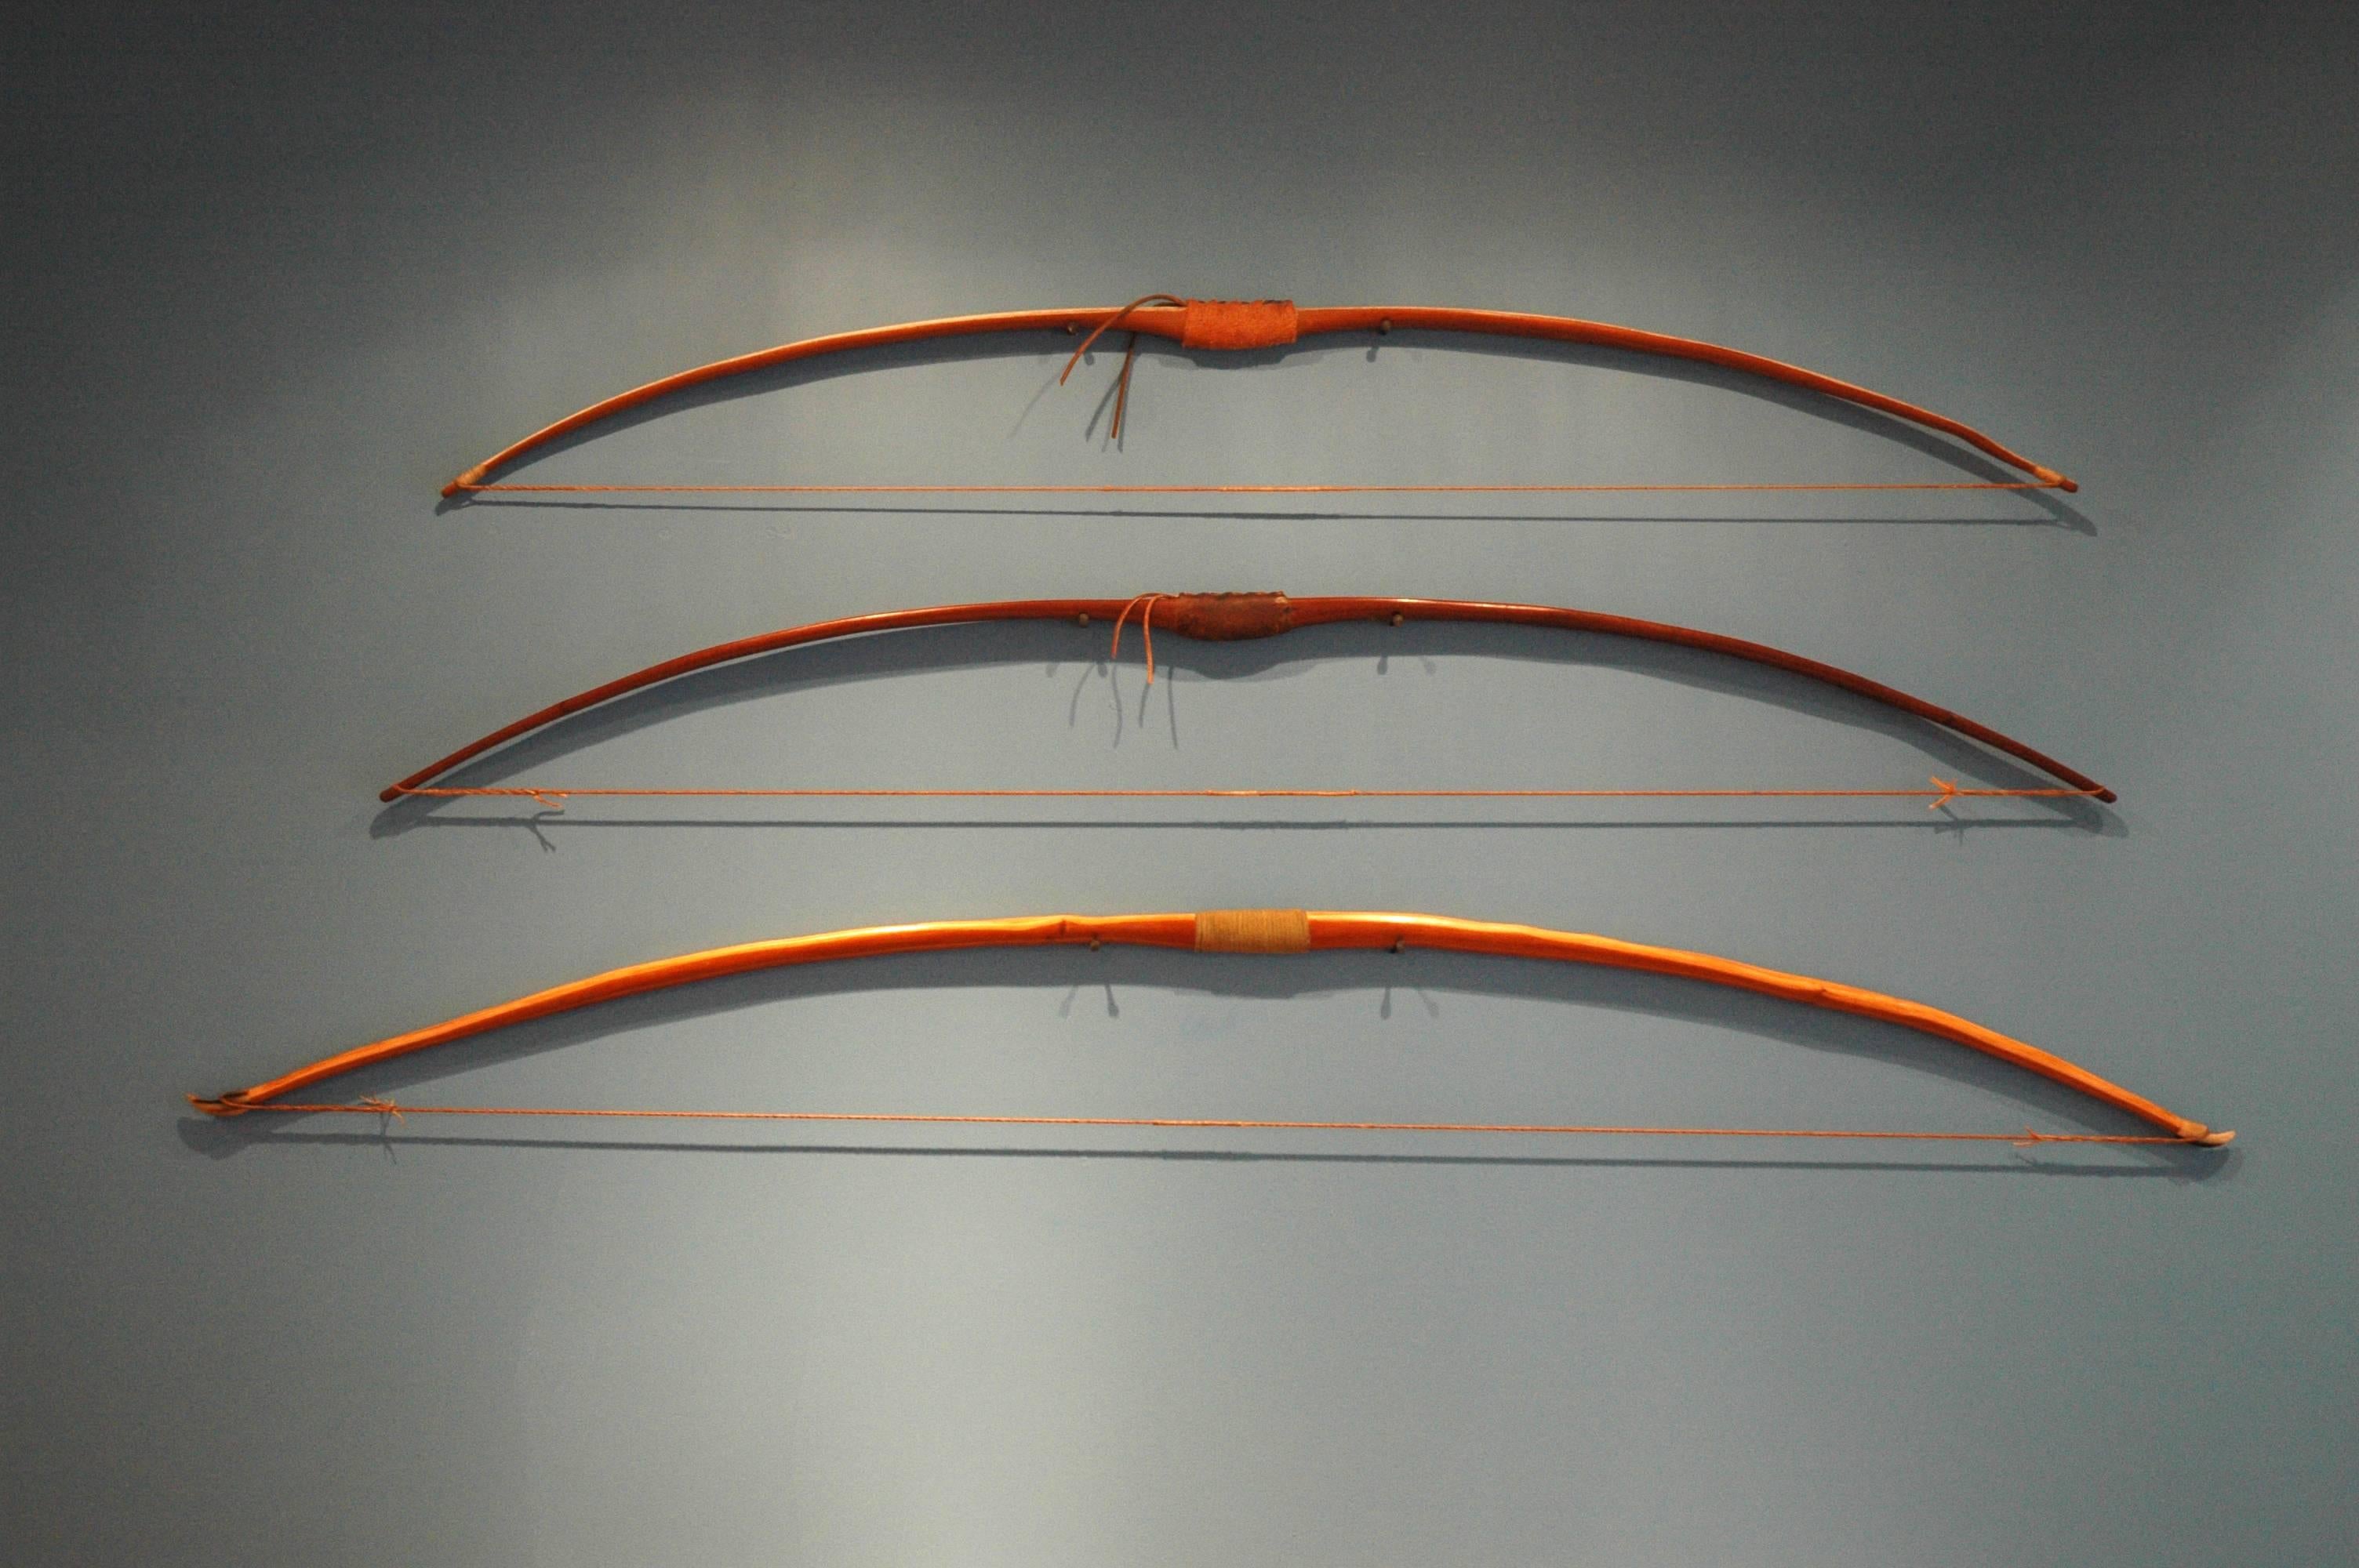 An amazing group of three one-of-a-kind bows made in the traditional technique by artist Daniel Oates in his Sharon CT studio.

English longbow is made of Pacific Northwest Yew from Oregon with cow horn tips, artificial sinew string and velvet